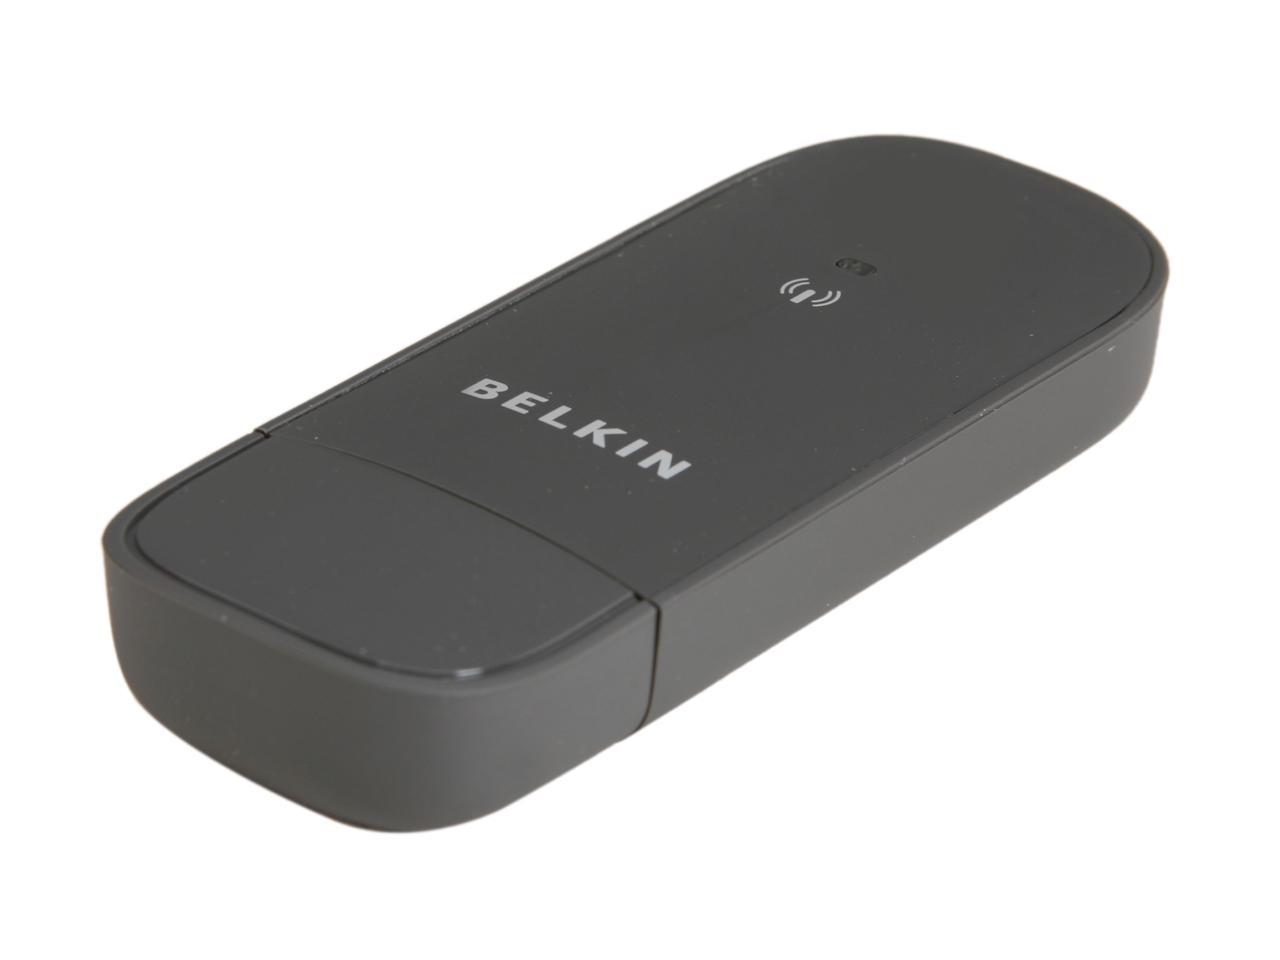 NEW Up to 300 Mbps Belkin N300 High Performance Wi-FI USB Adapter F9L1002 